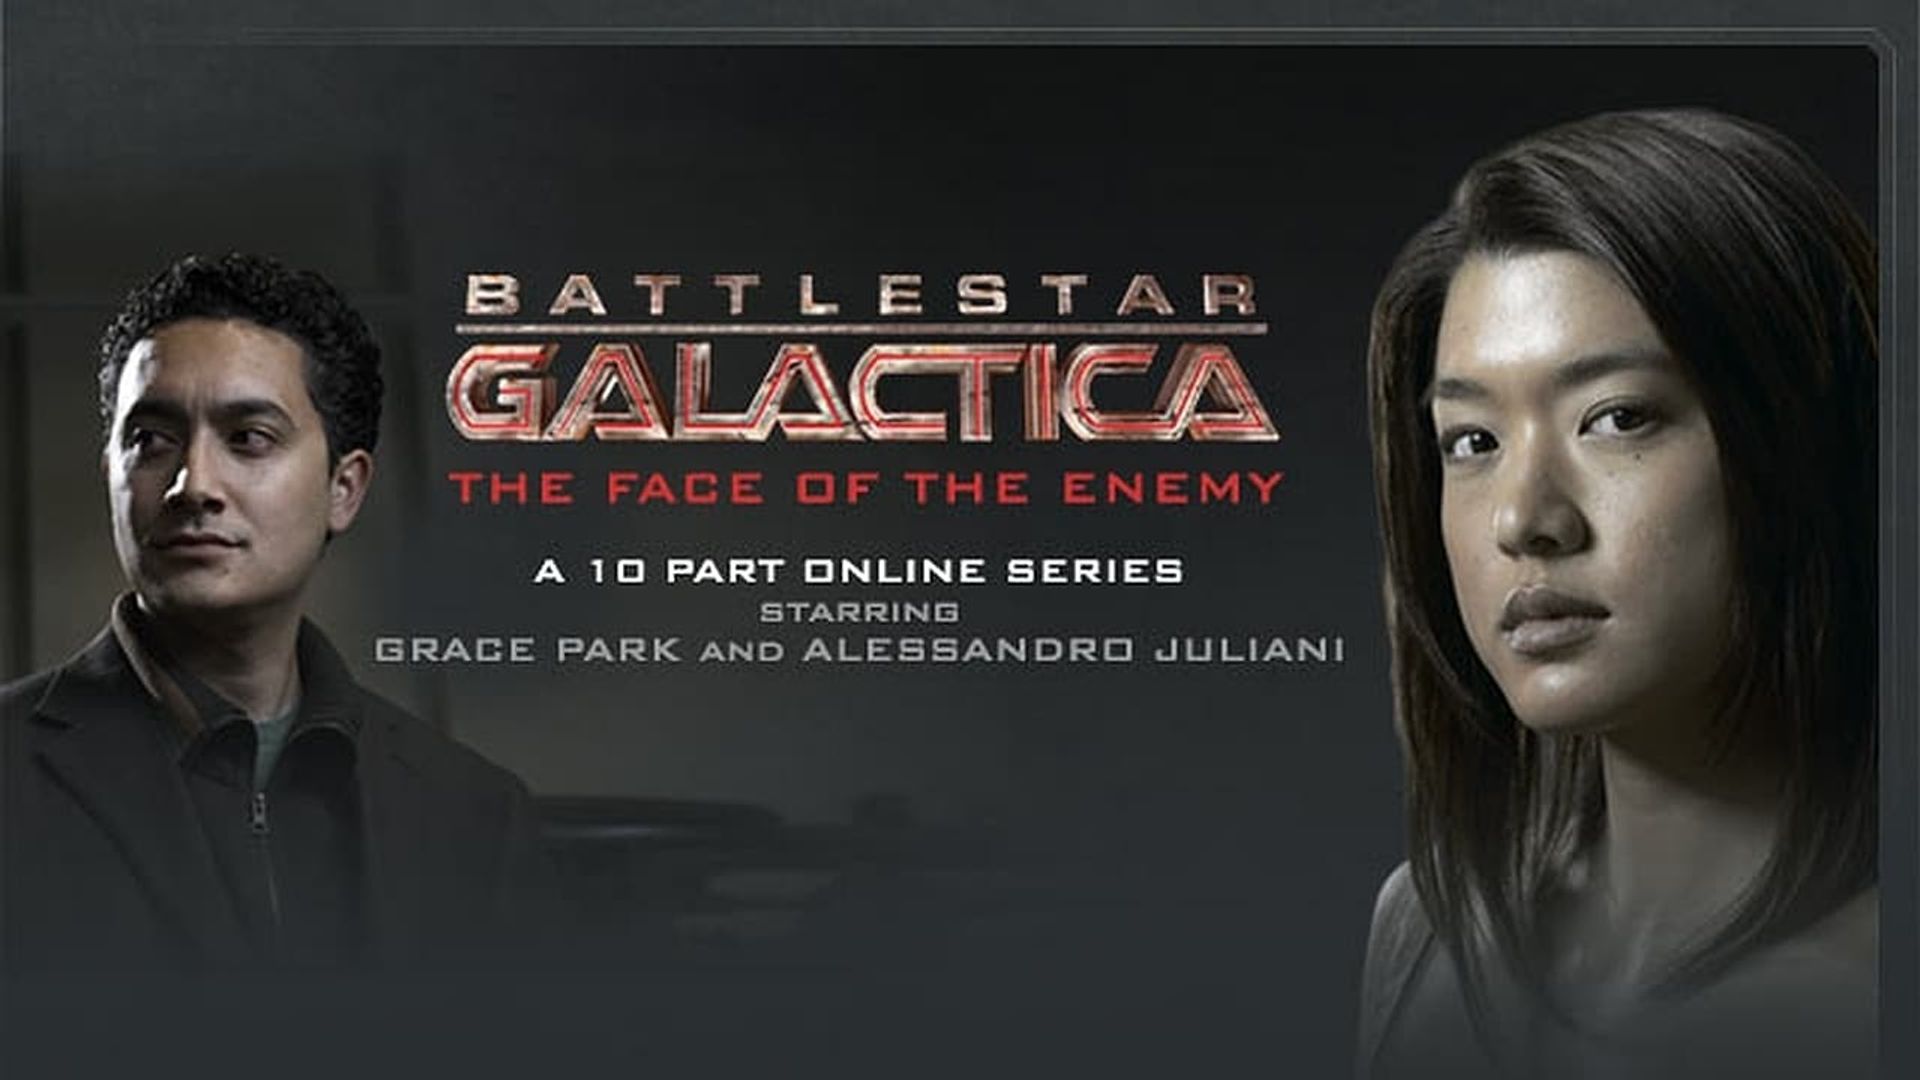 Battlestar Galactica: The Face of the Enemy background